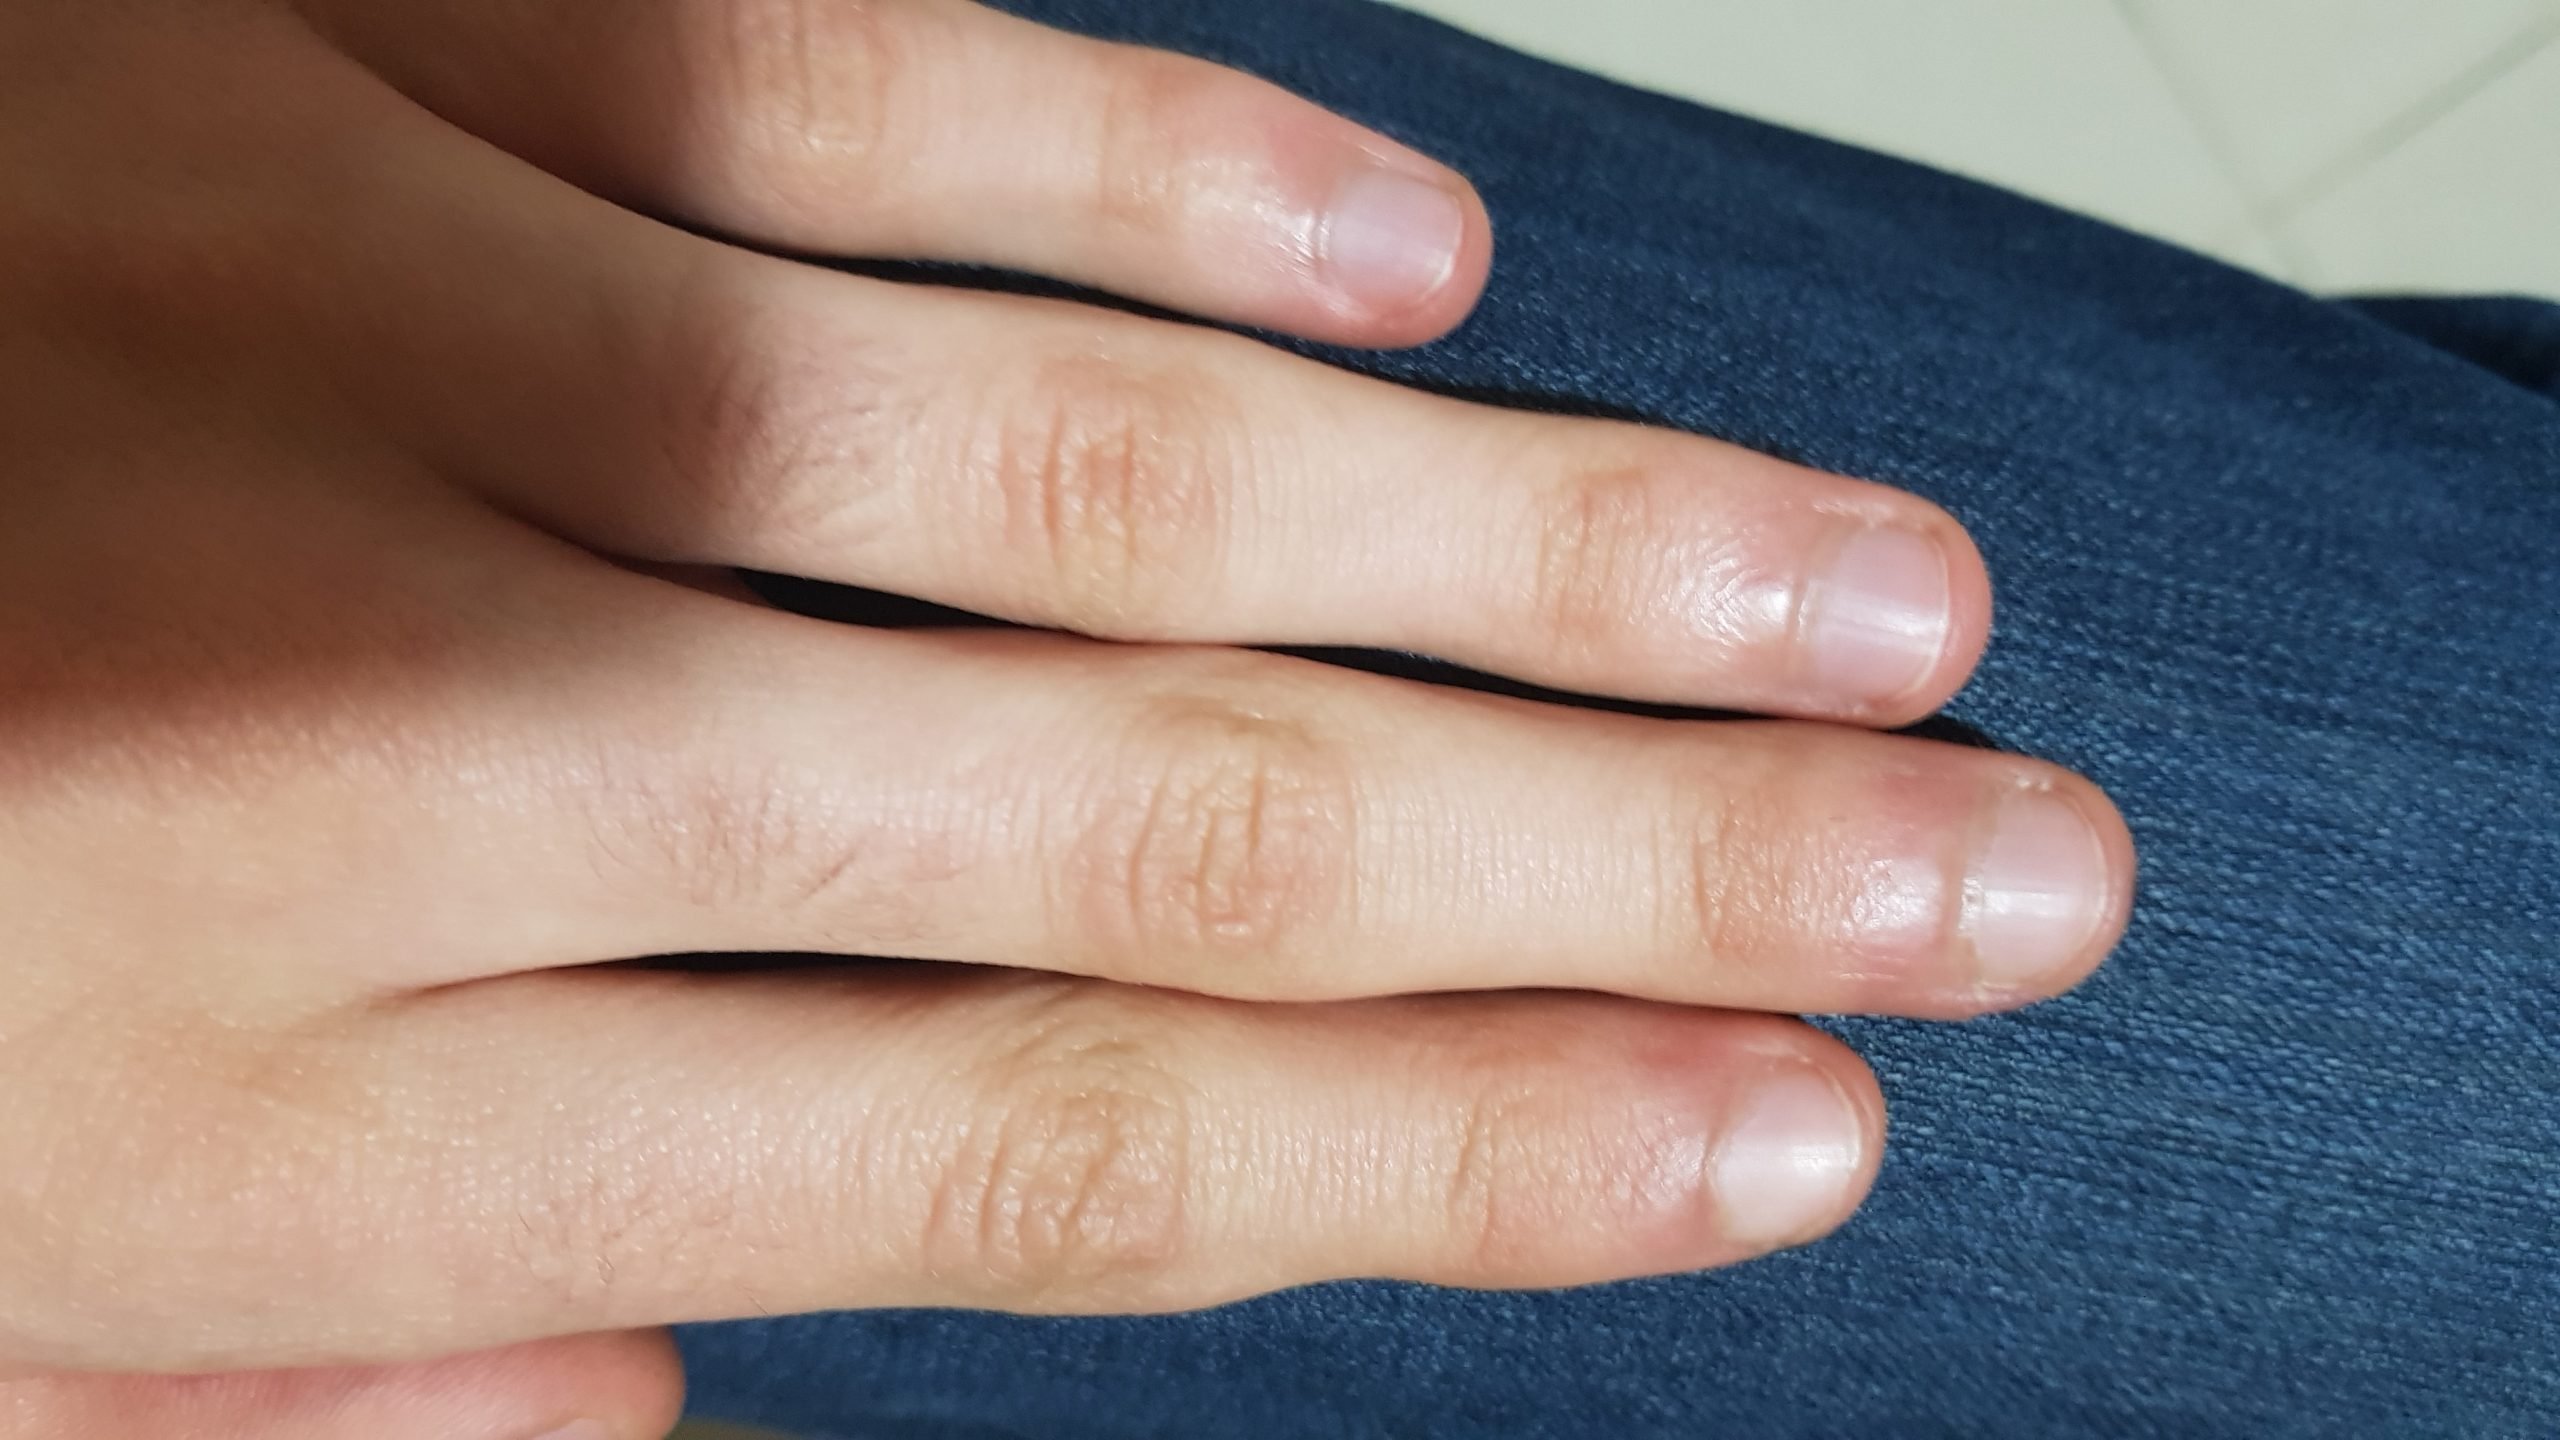 Can I get HIV from rectal fingering if I bite my cuticles?